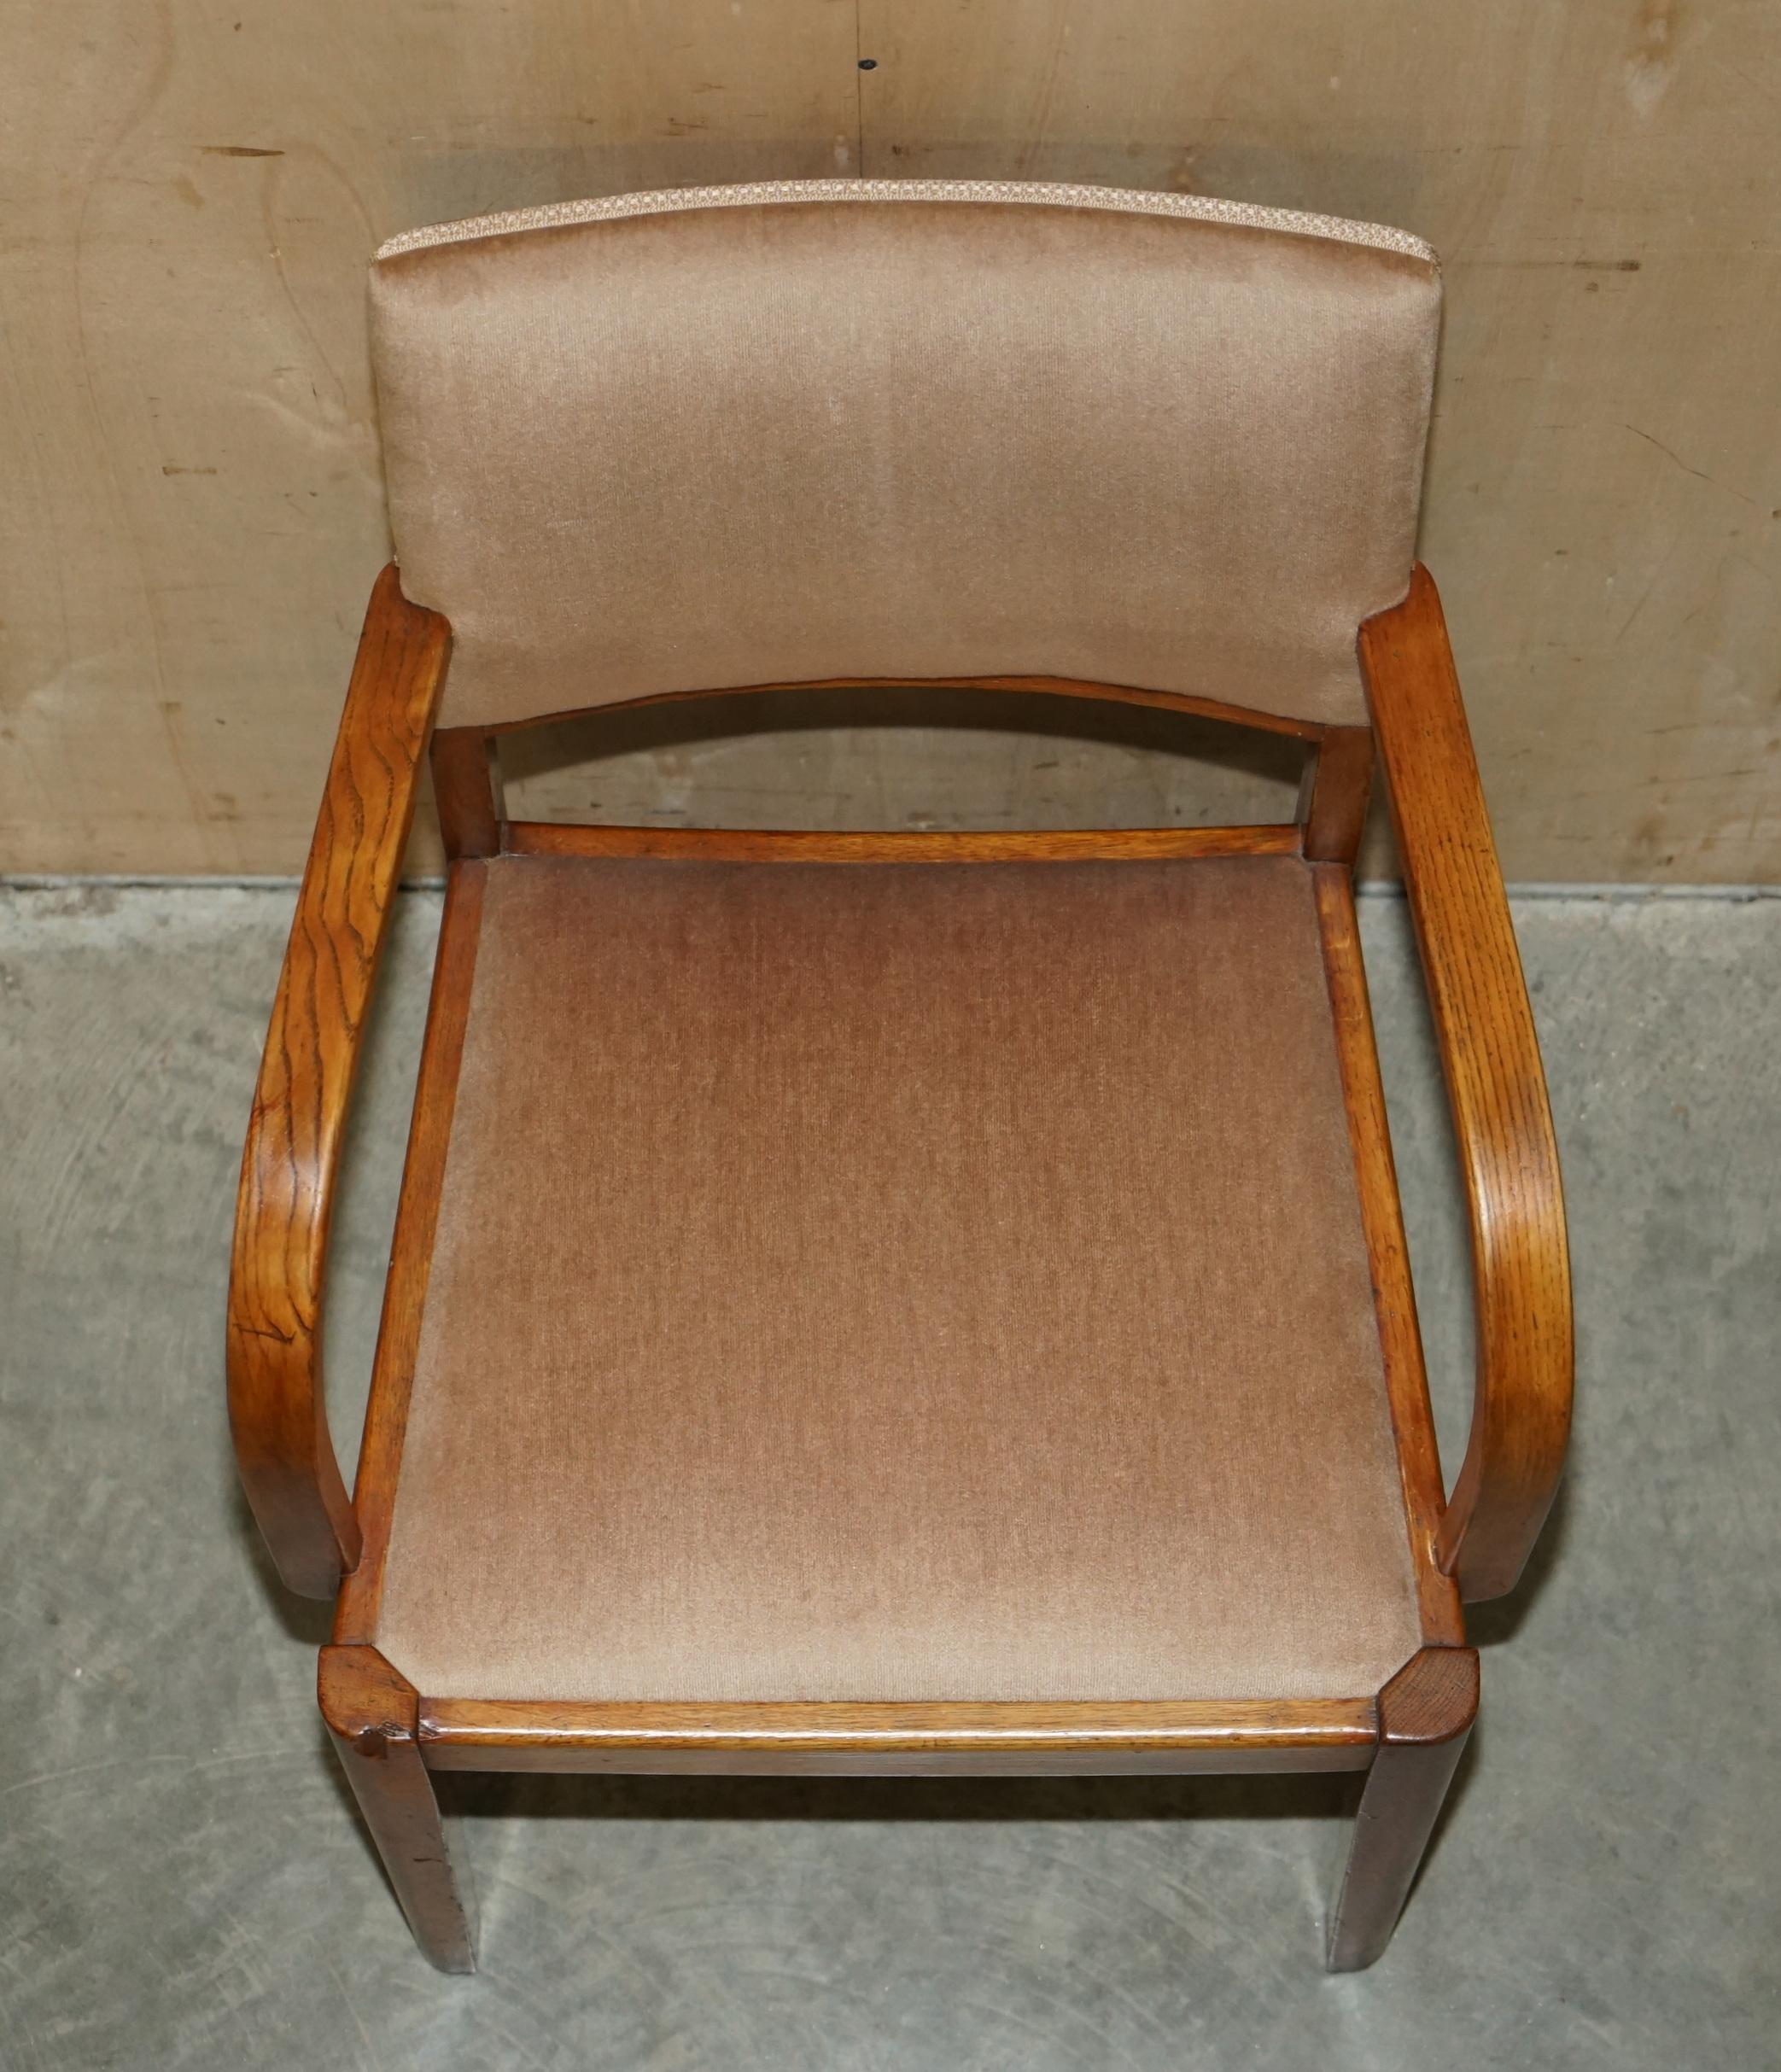 Four Dining Chairs from Rms Queen Mary ii Cunard White Star Liner Cruise Ship For Sale 6